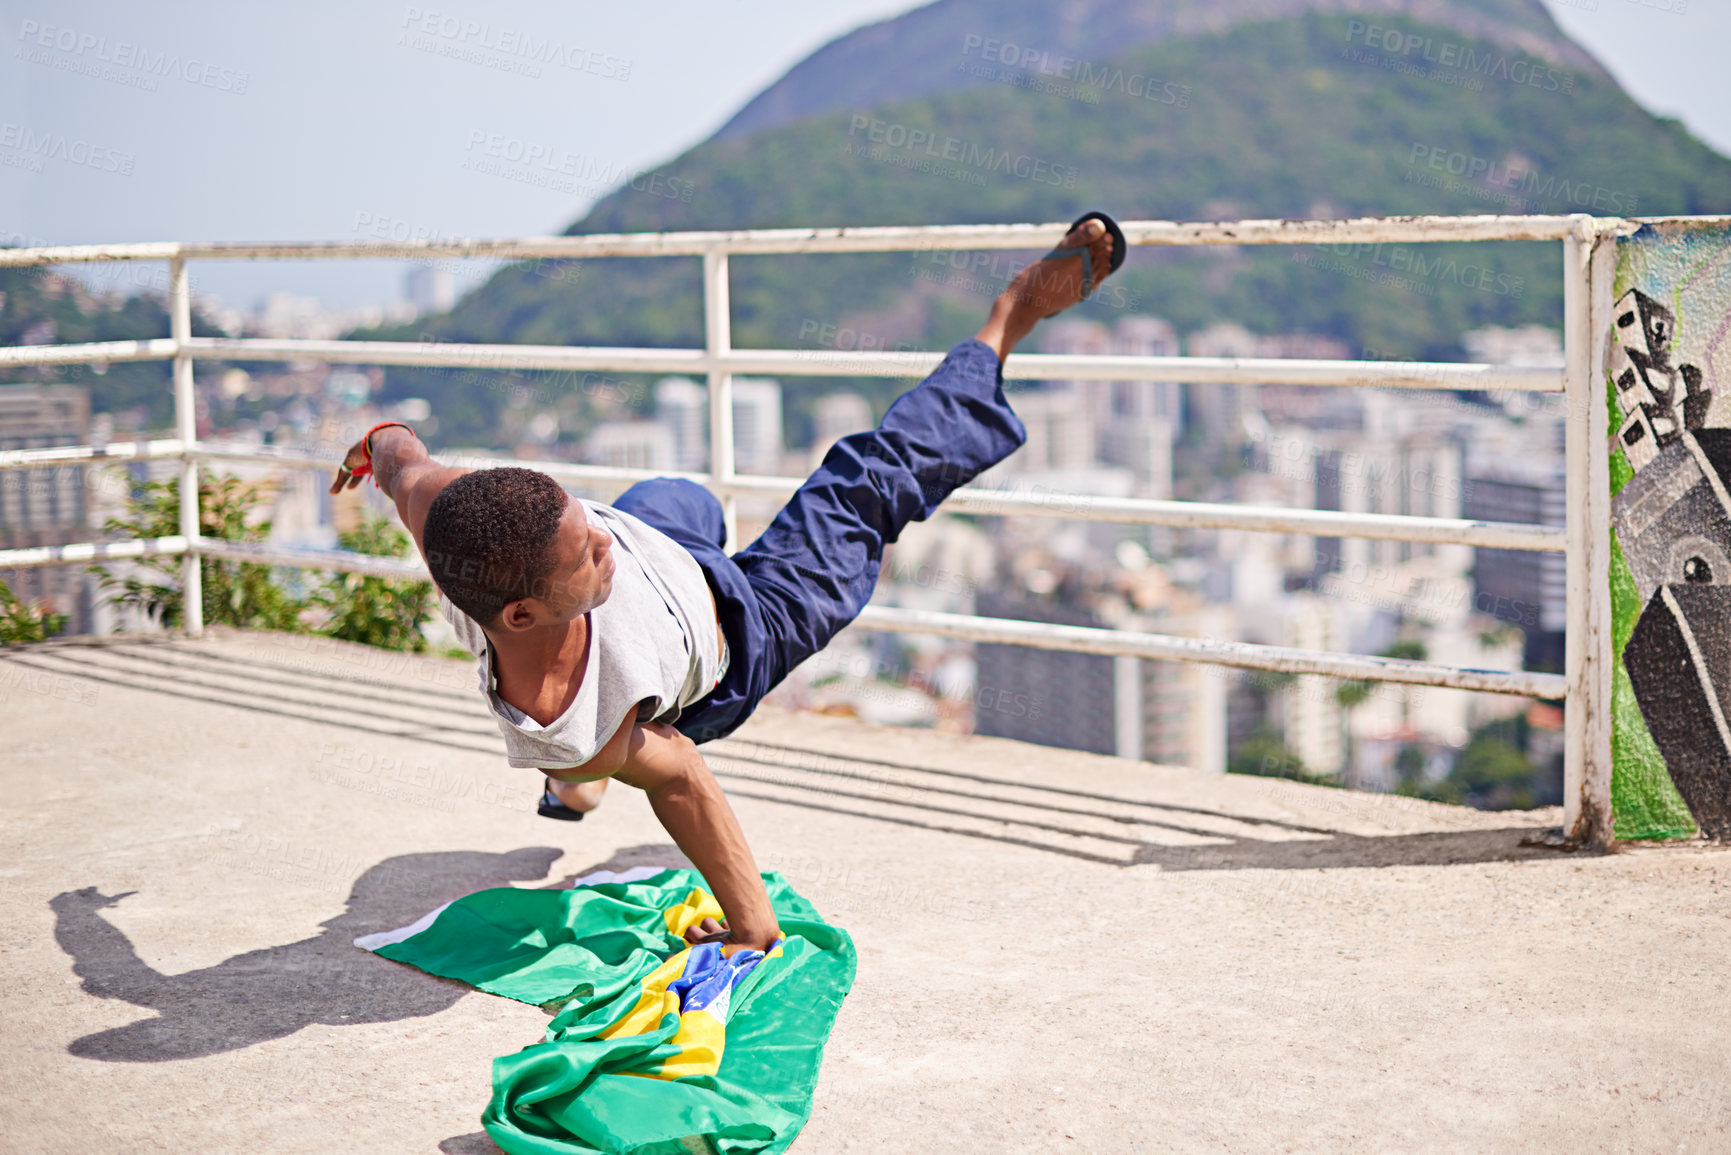 Buy stock photo Shot of a young male breakdancer in an urban setting